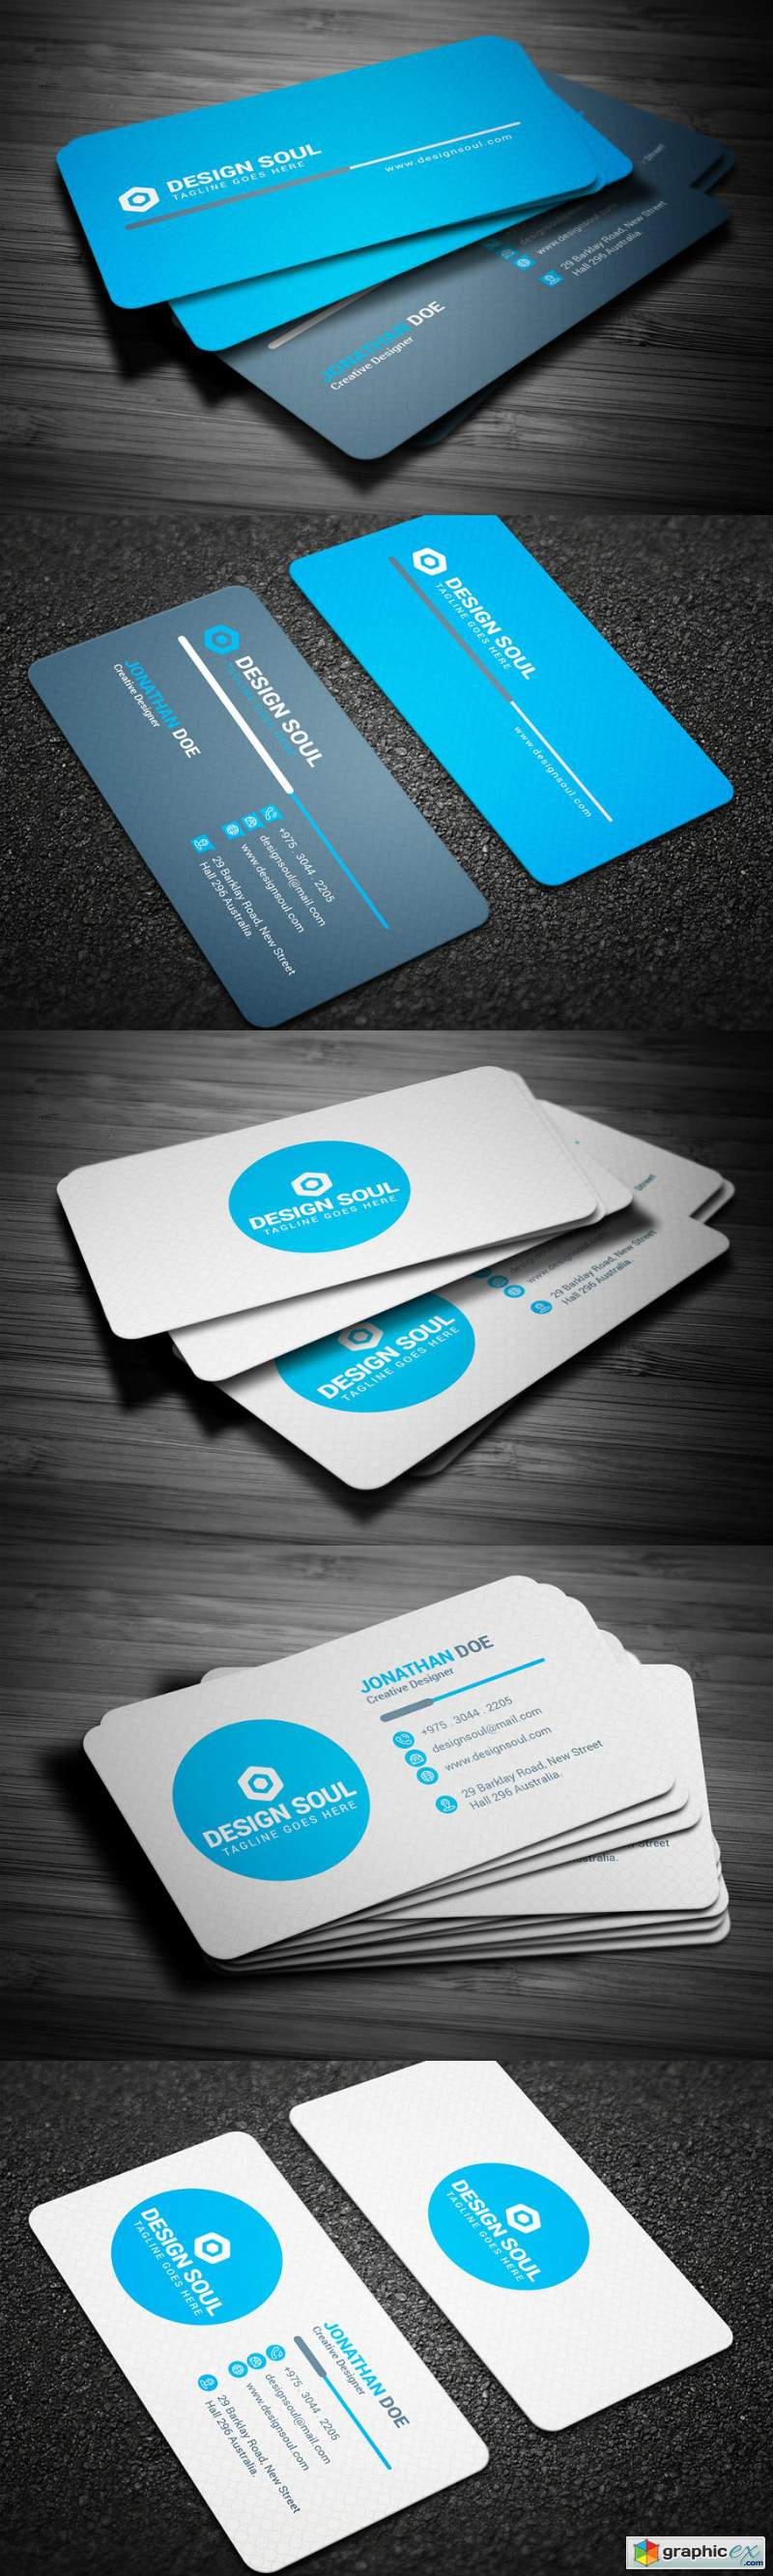 Business Cards 3644855